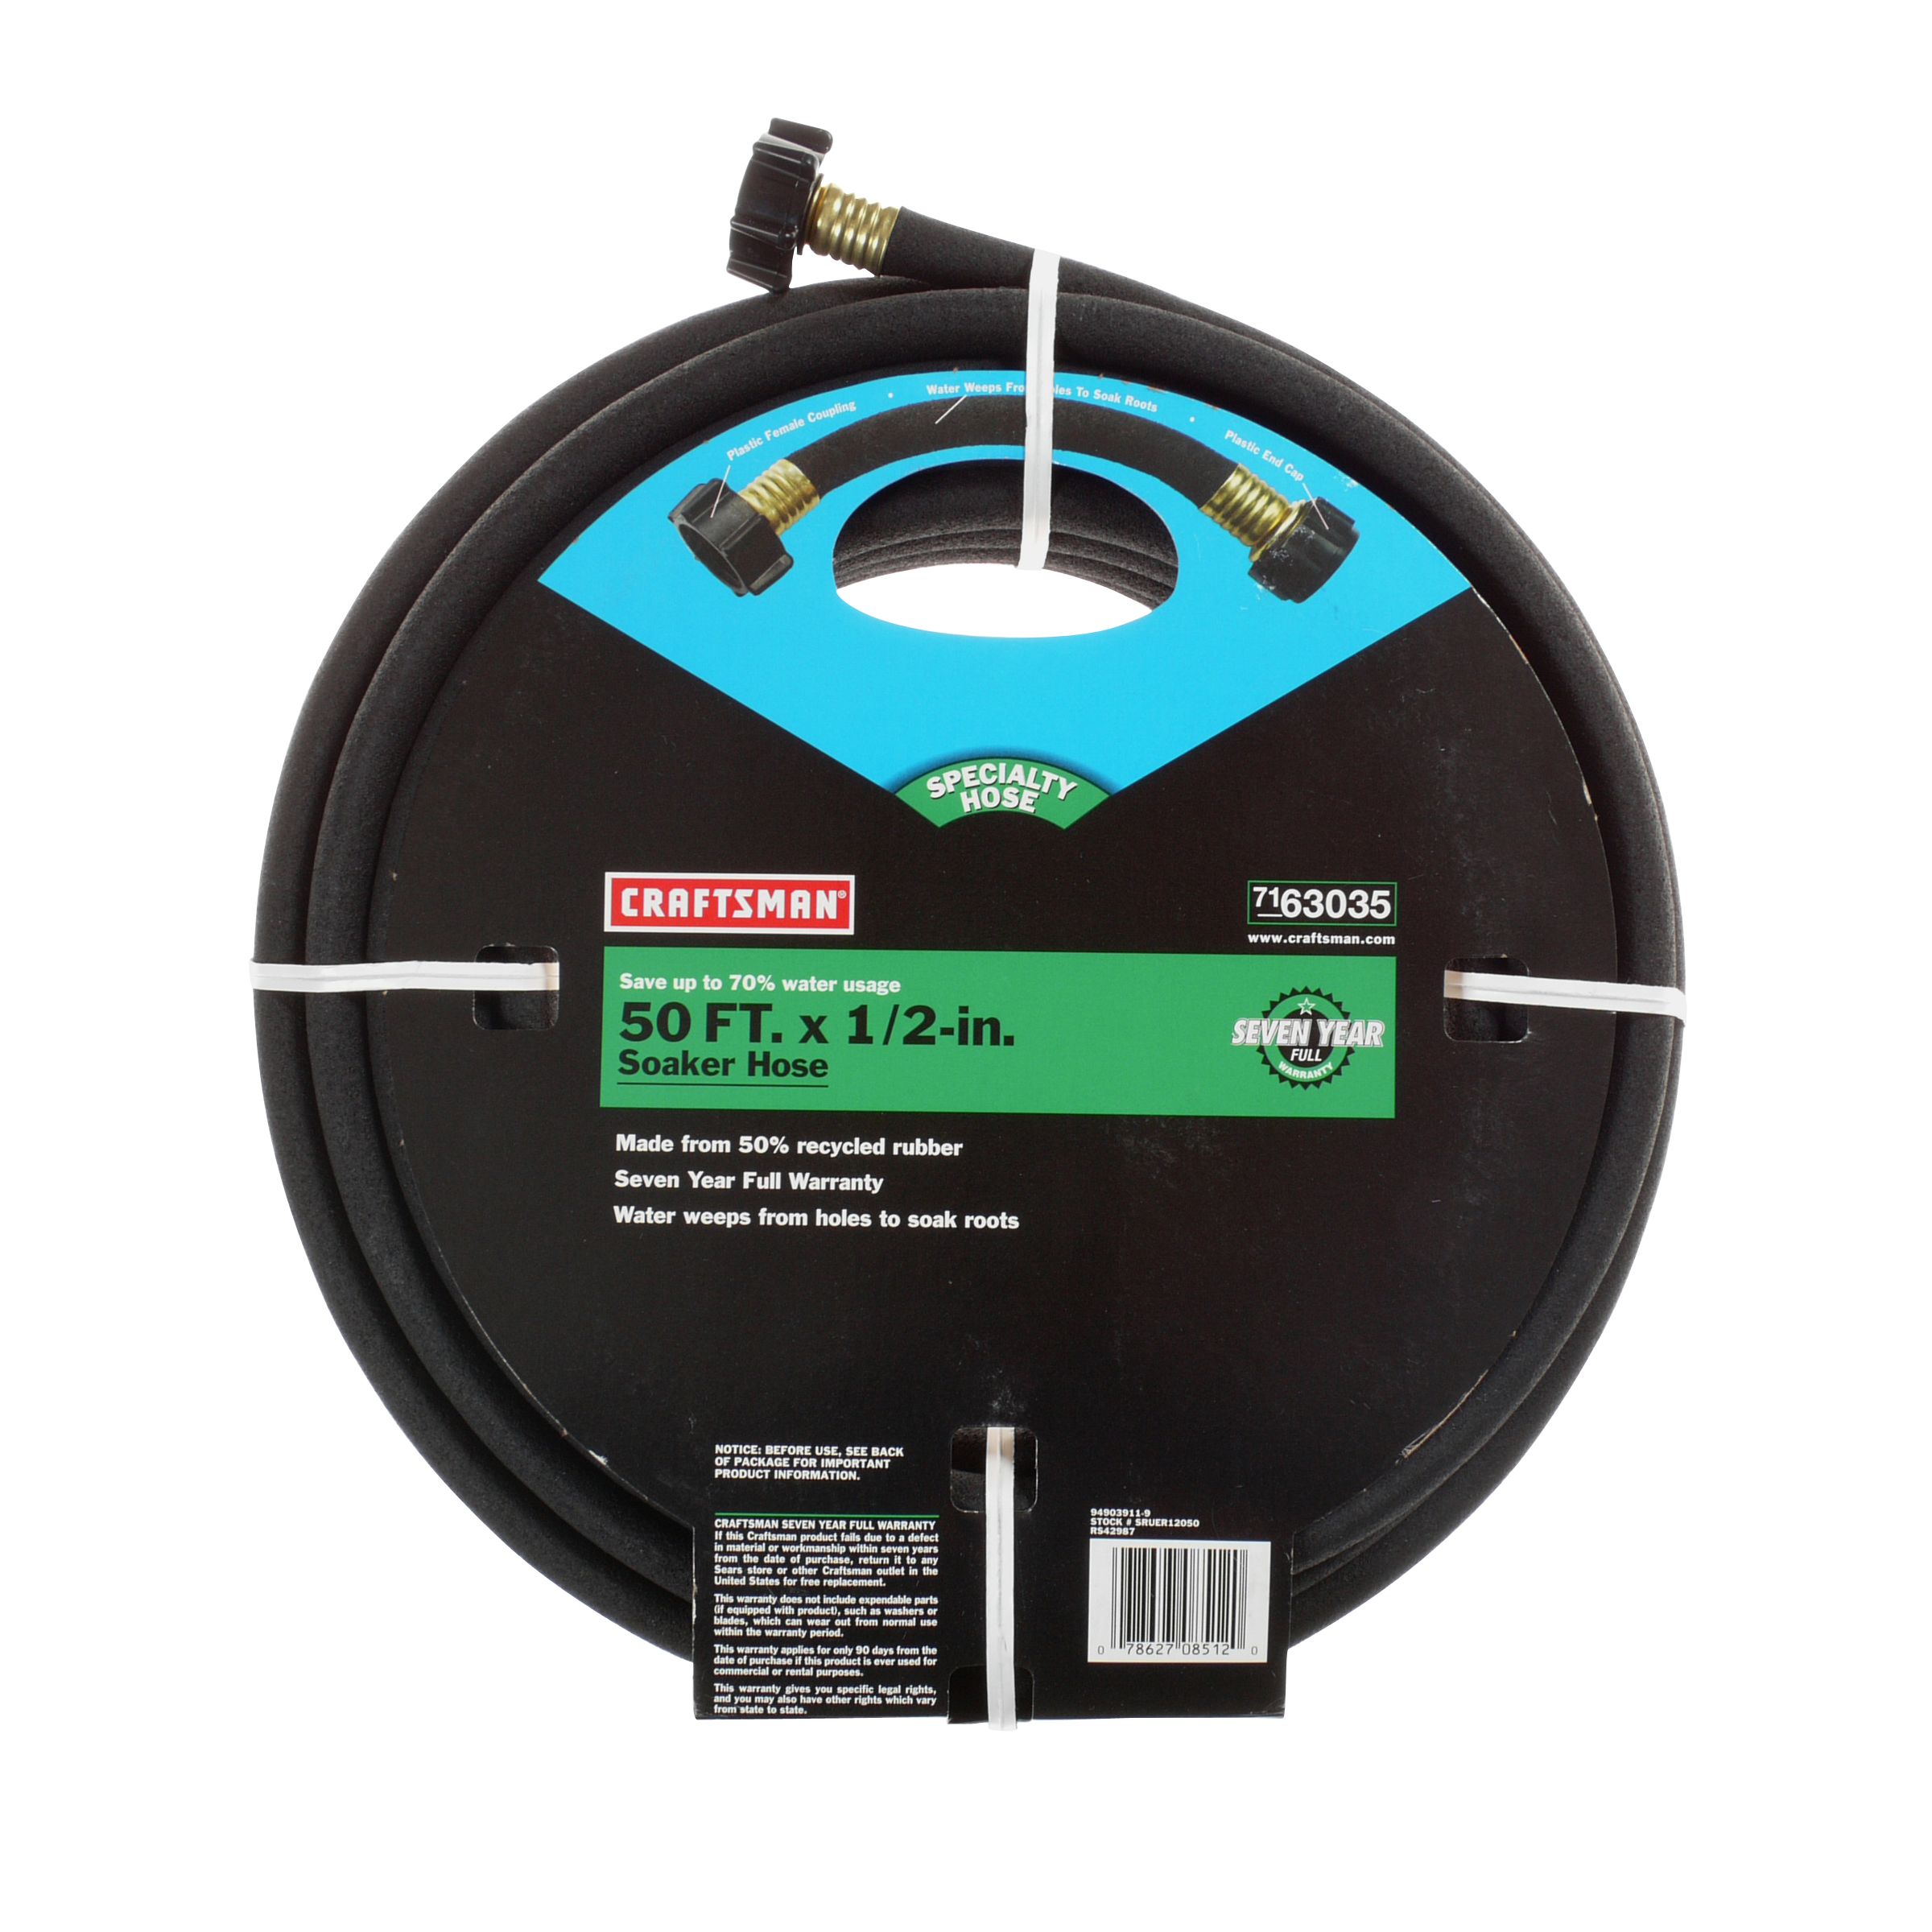 Craftsman 50-ft x 1/2-in Soaker Hose $6.99 Today Only